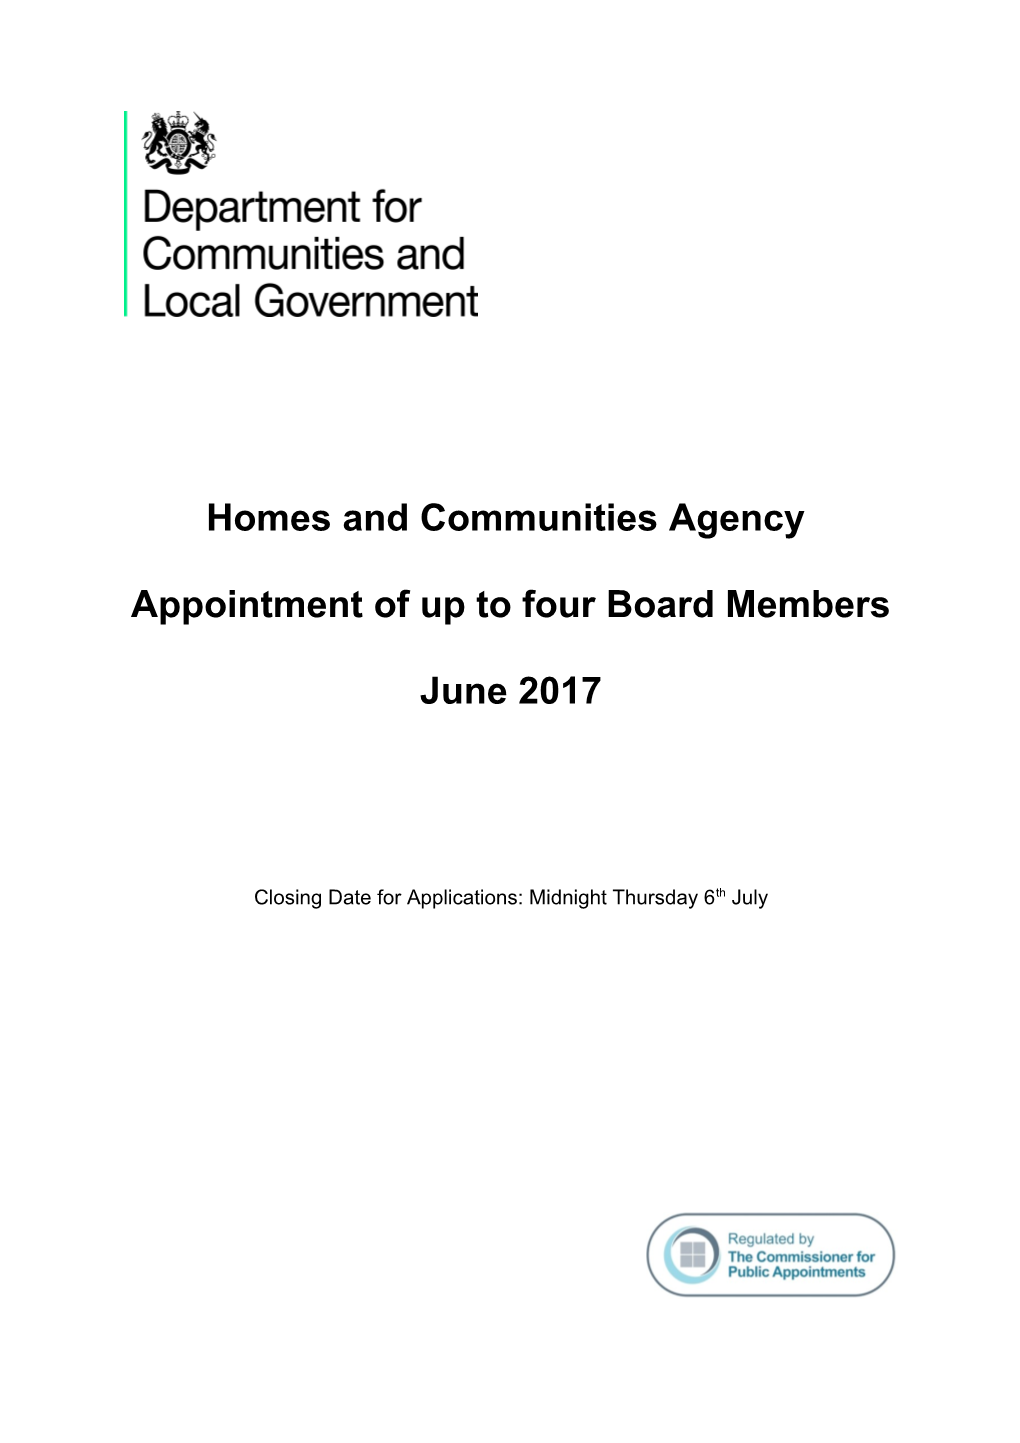 Homes and Communities Agency